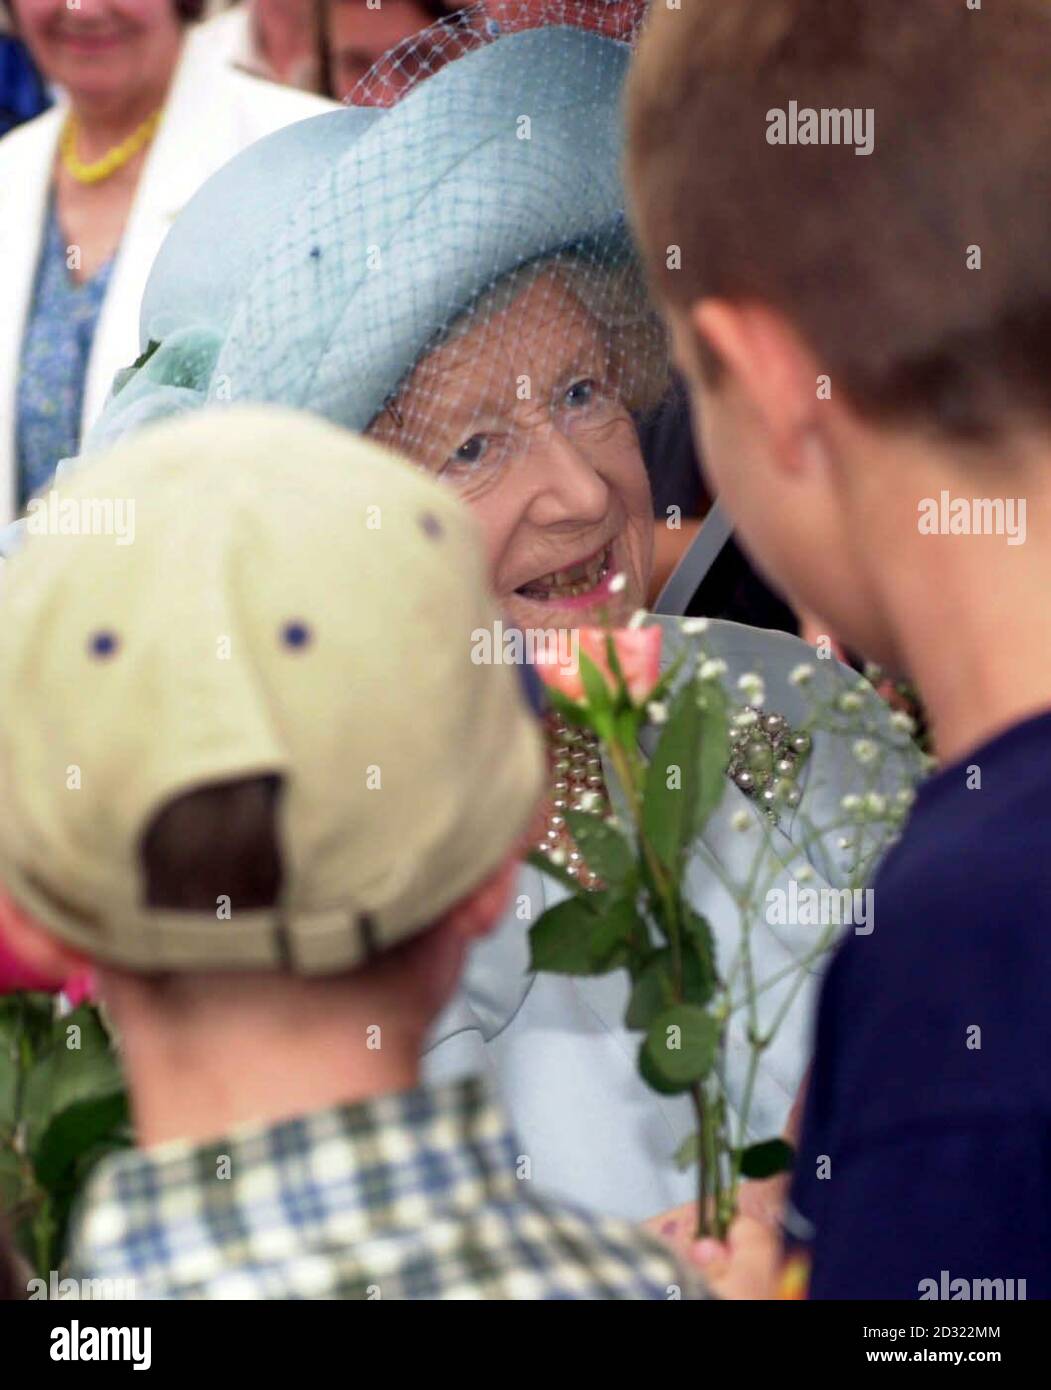 Queen Elizabeth the Queen Mother arrives at the Sandringham Flower Show in Norfolk only days before her 101st birthday. Stock Photo